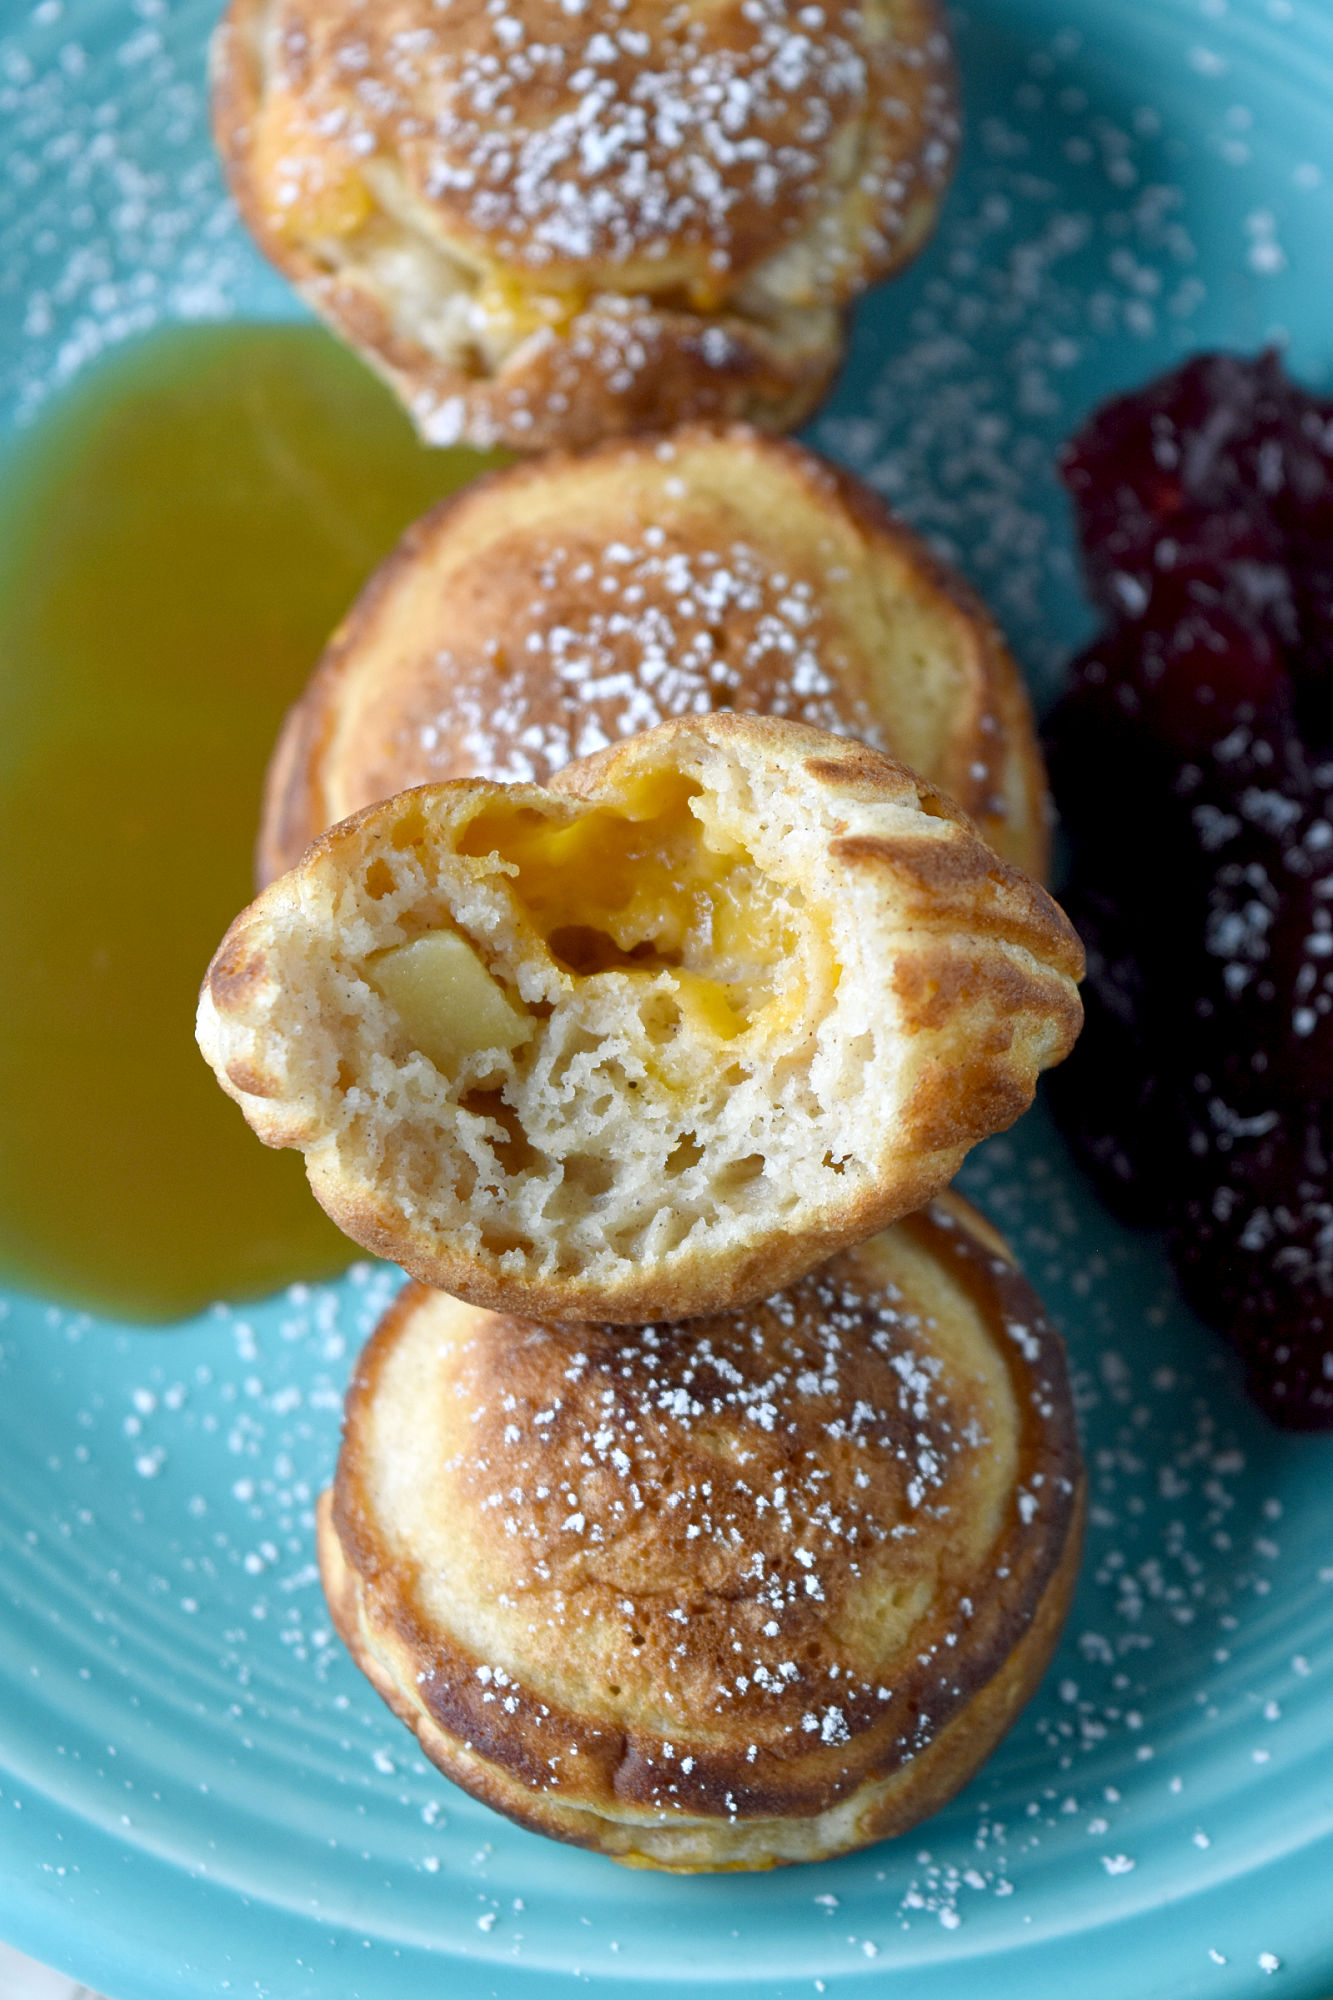 Apple Cheddar Ebelskiver are little pockets of pancake goodness filled with sweet apples and tangy Cheddar.  They’re fun for a brunch, snack, or just because you want to make something a little different.  #FallFlavors #ebelskiver #apple #cheddar #pancakes